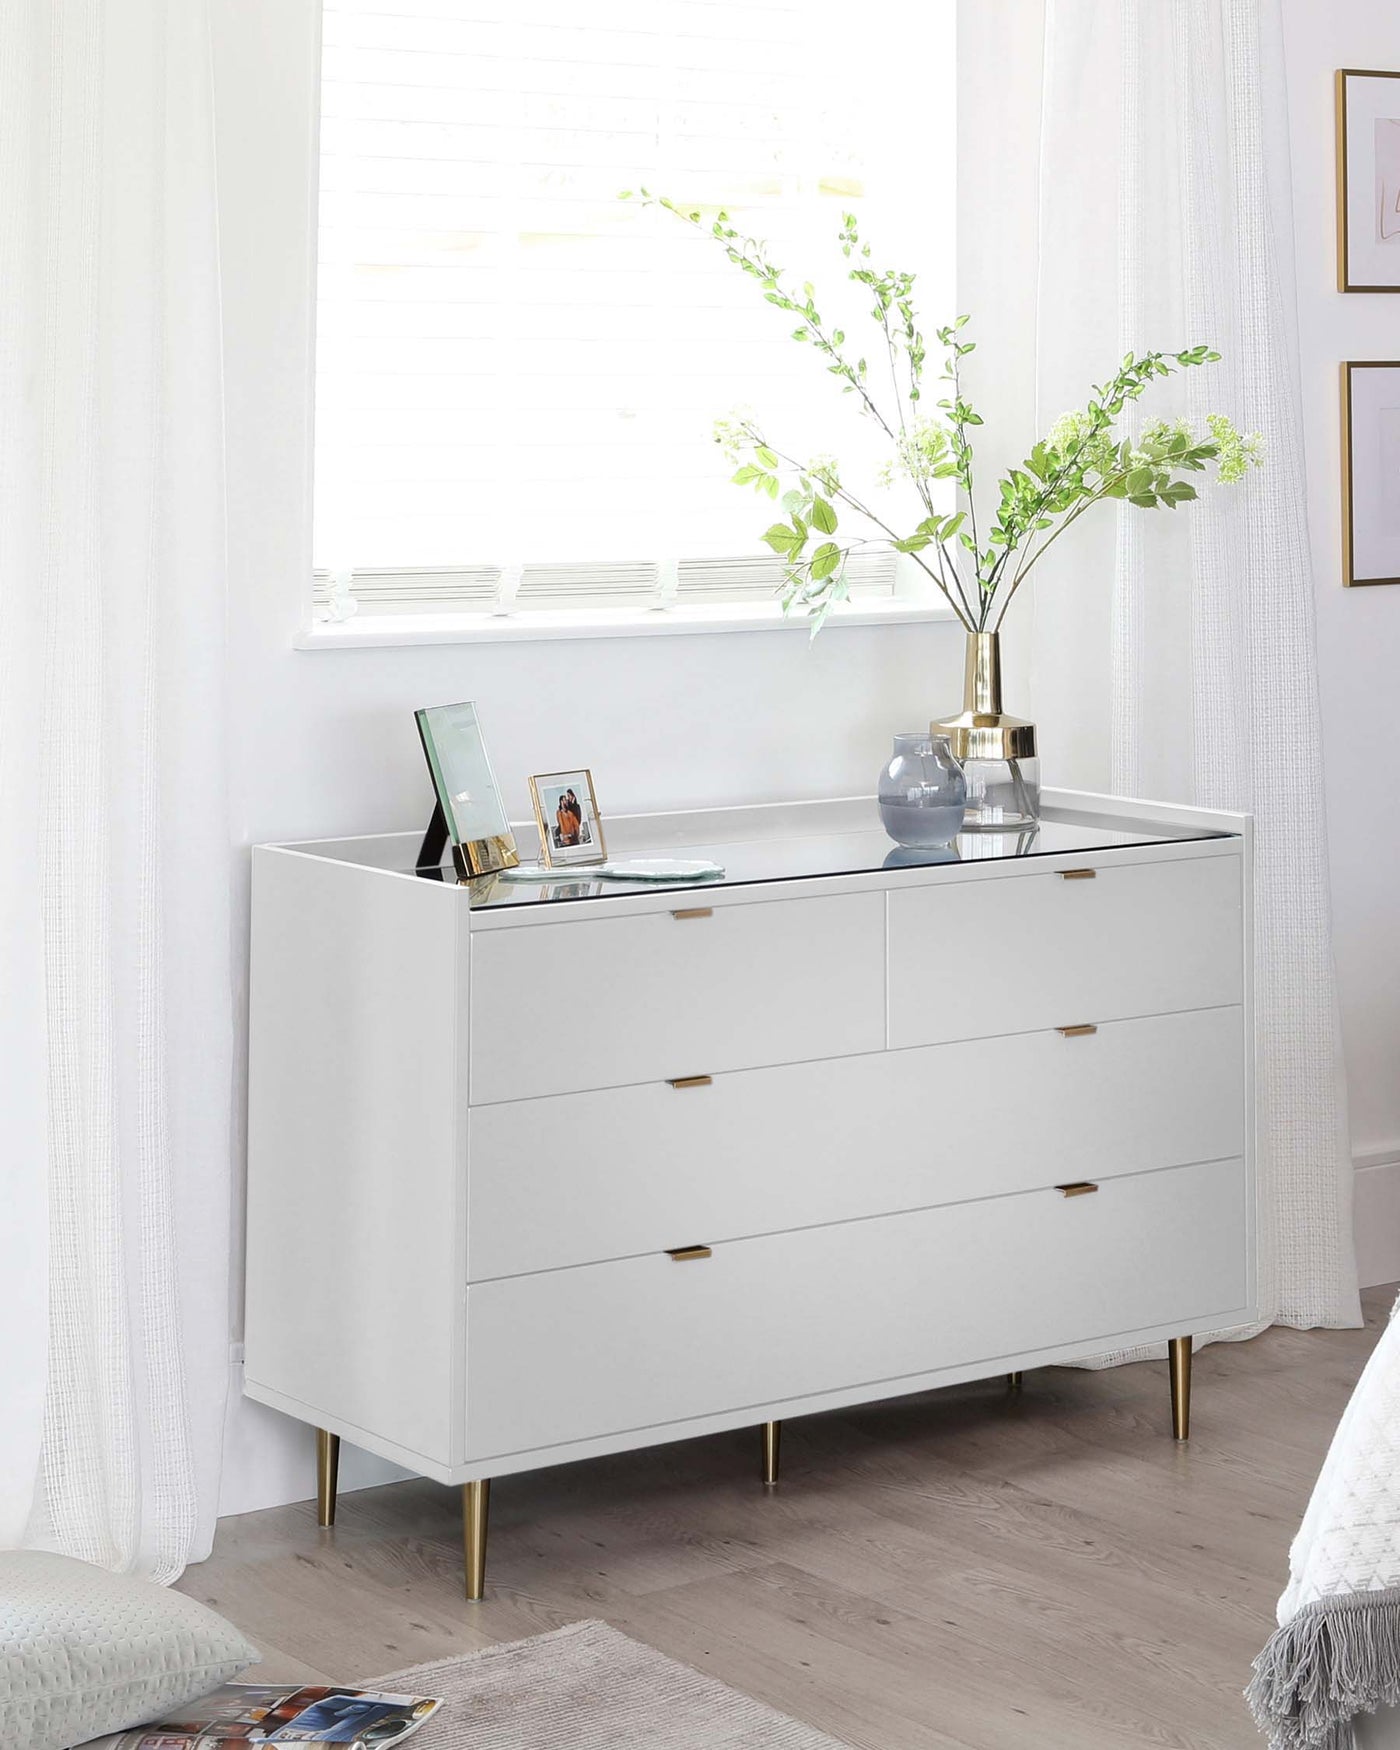 A modern white dresser with four drawers featuring slim horizontal handles and brass-coloured metal legs. The dresser is staged against a bright, airy room with a hardwood floor, and it is accessorized with decorative items including a brass vase with green foliage, a blue ceramic pot, and some picture frames.